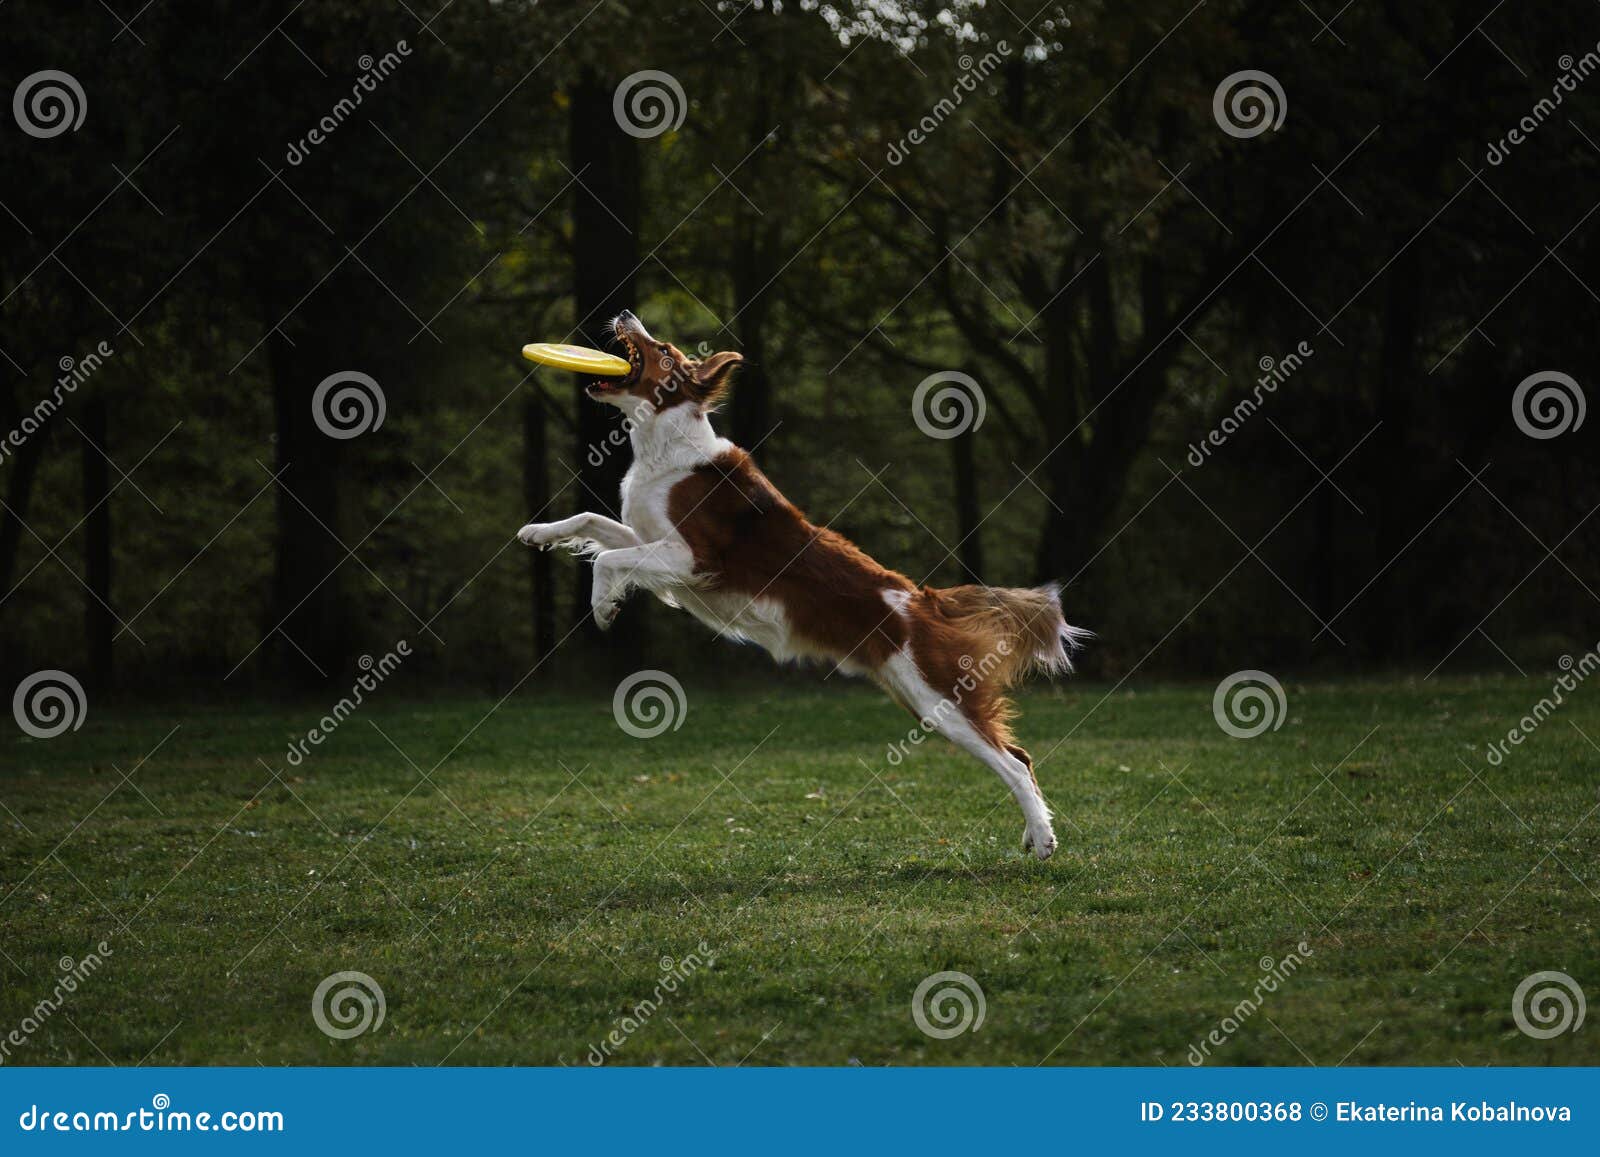 competitions and sports with dog in fresh air on green field. fluffy border collie of reddish white sable color jumps high and